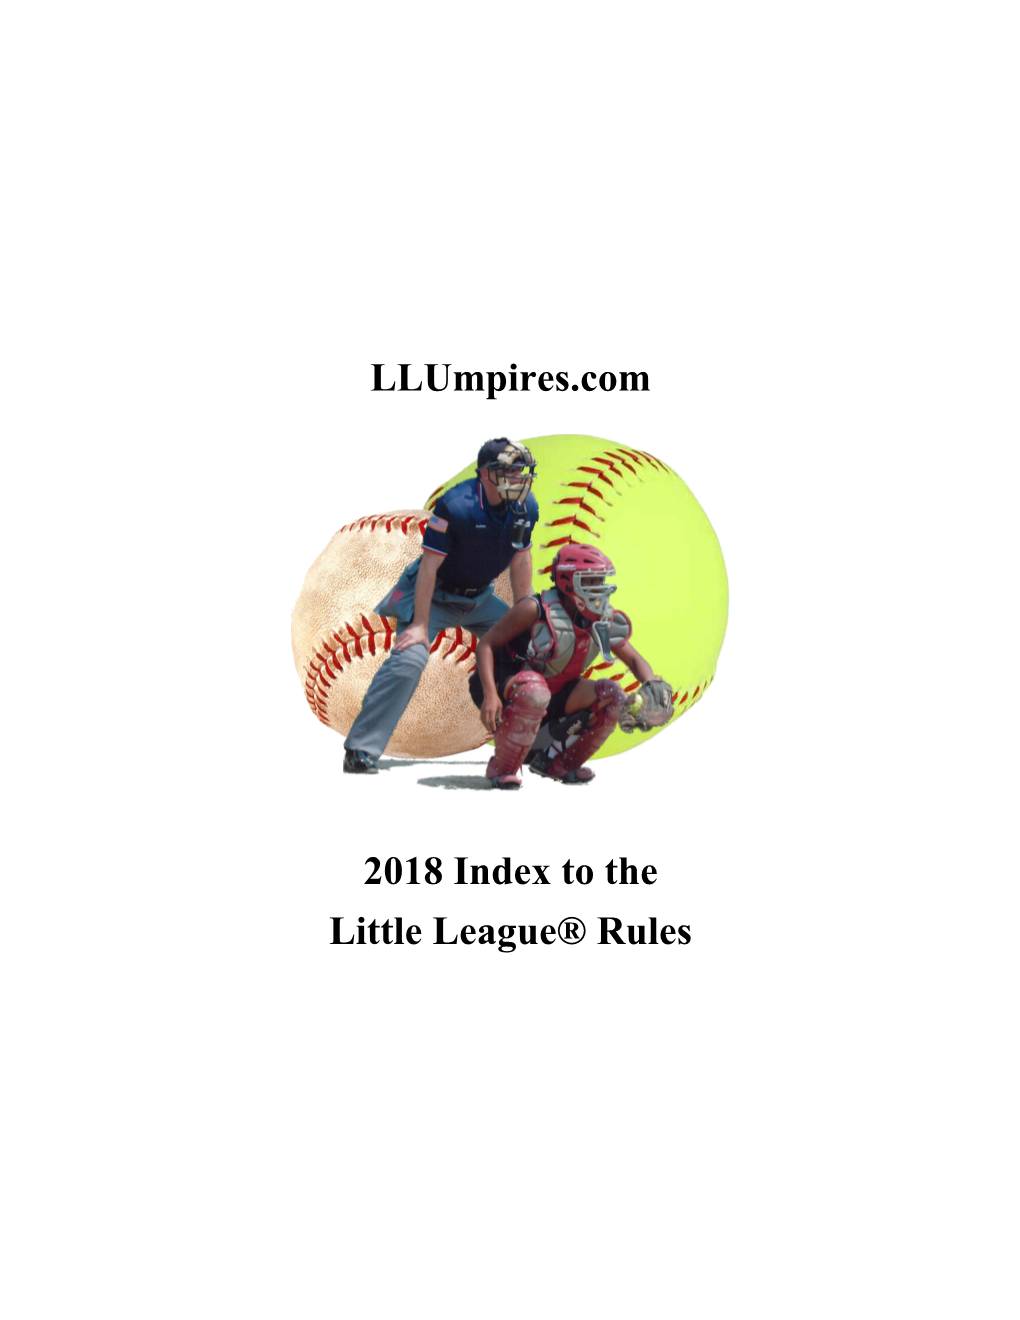 Kevin Hunters Index to 2018 Little League Rules